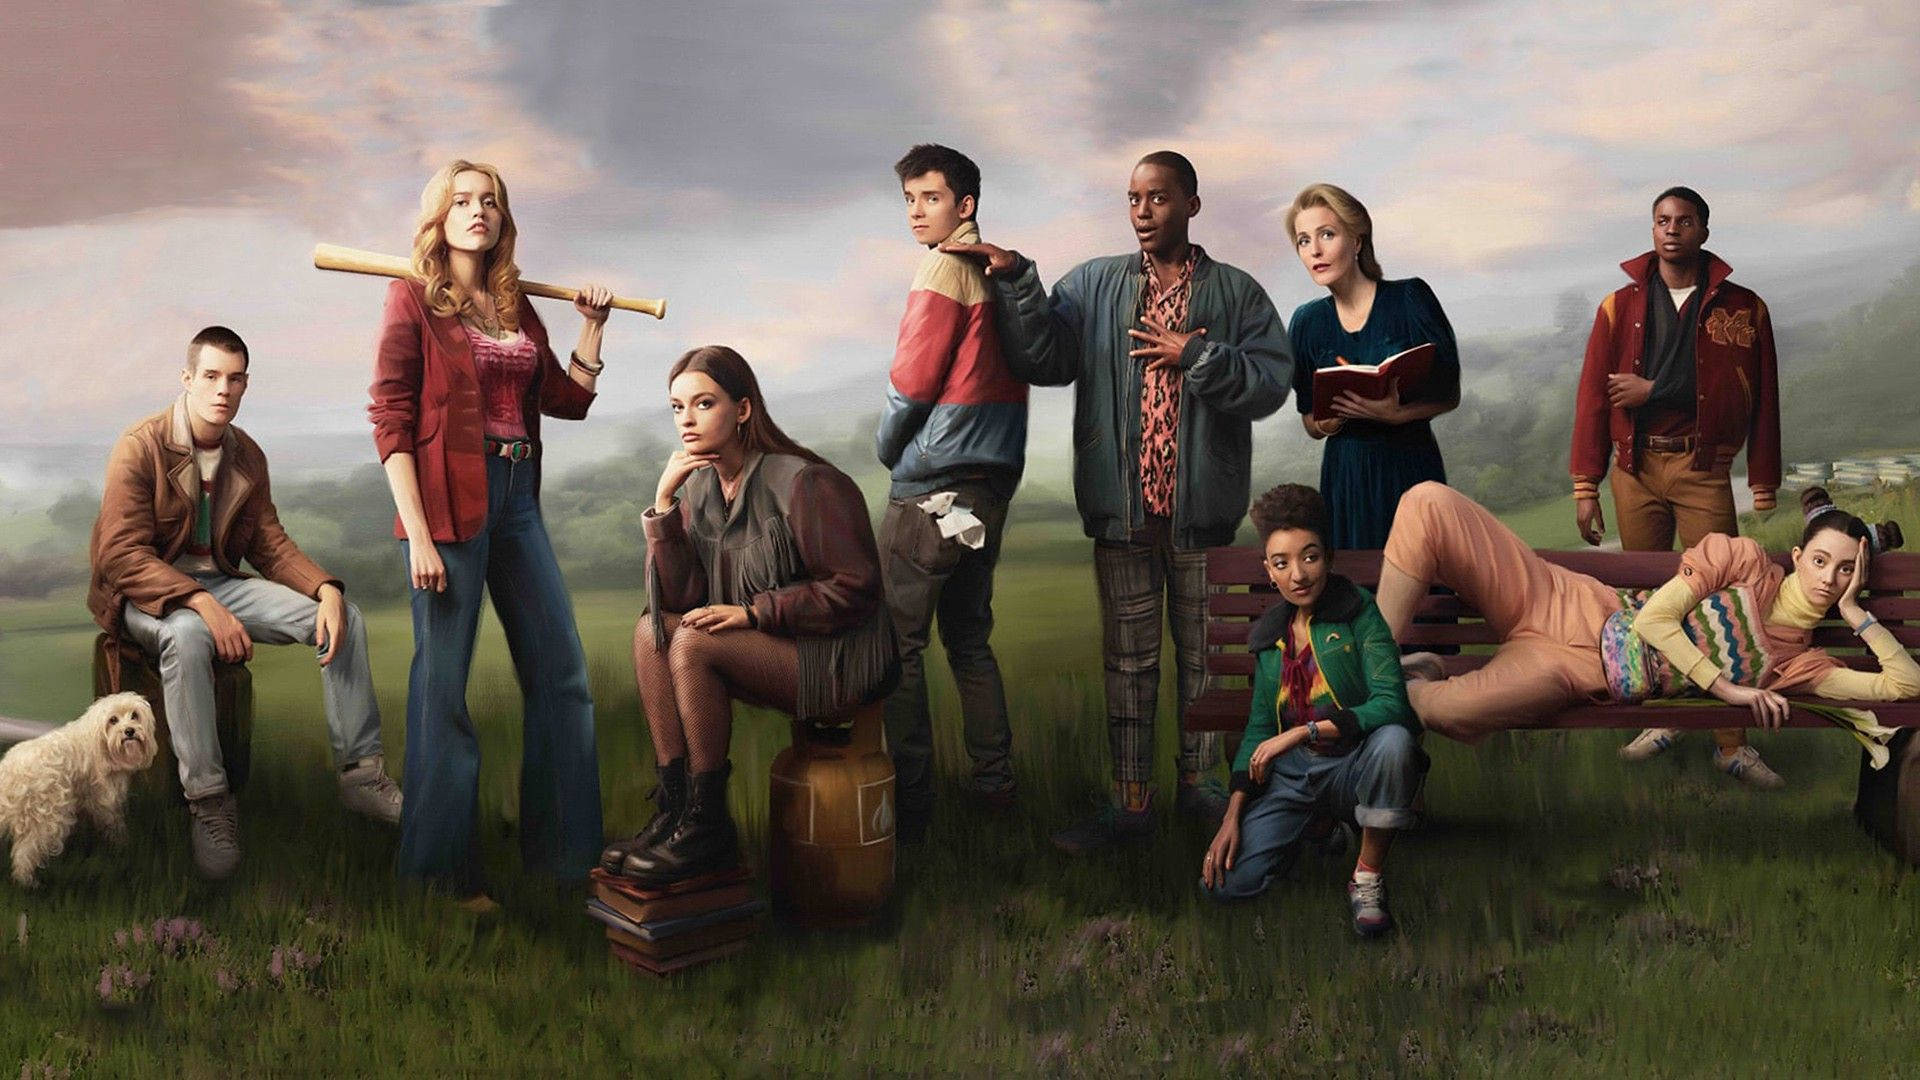 Sex Education Cast In Meadow Background